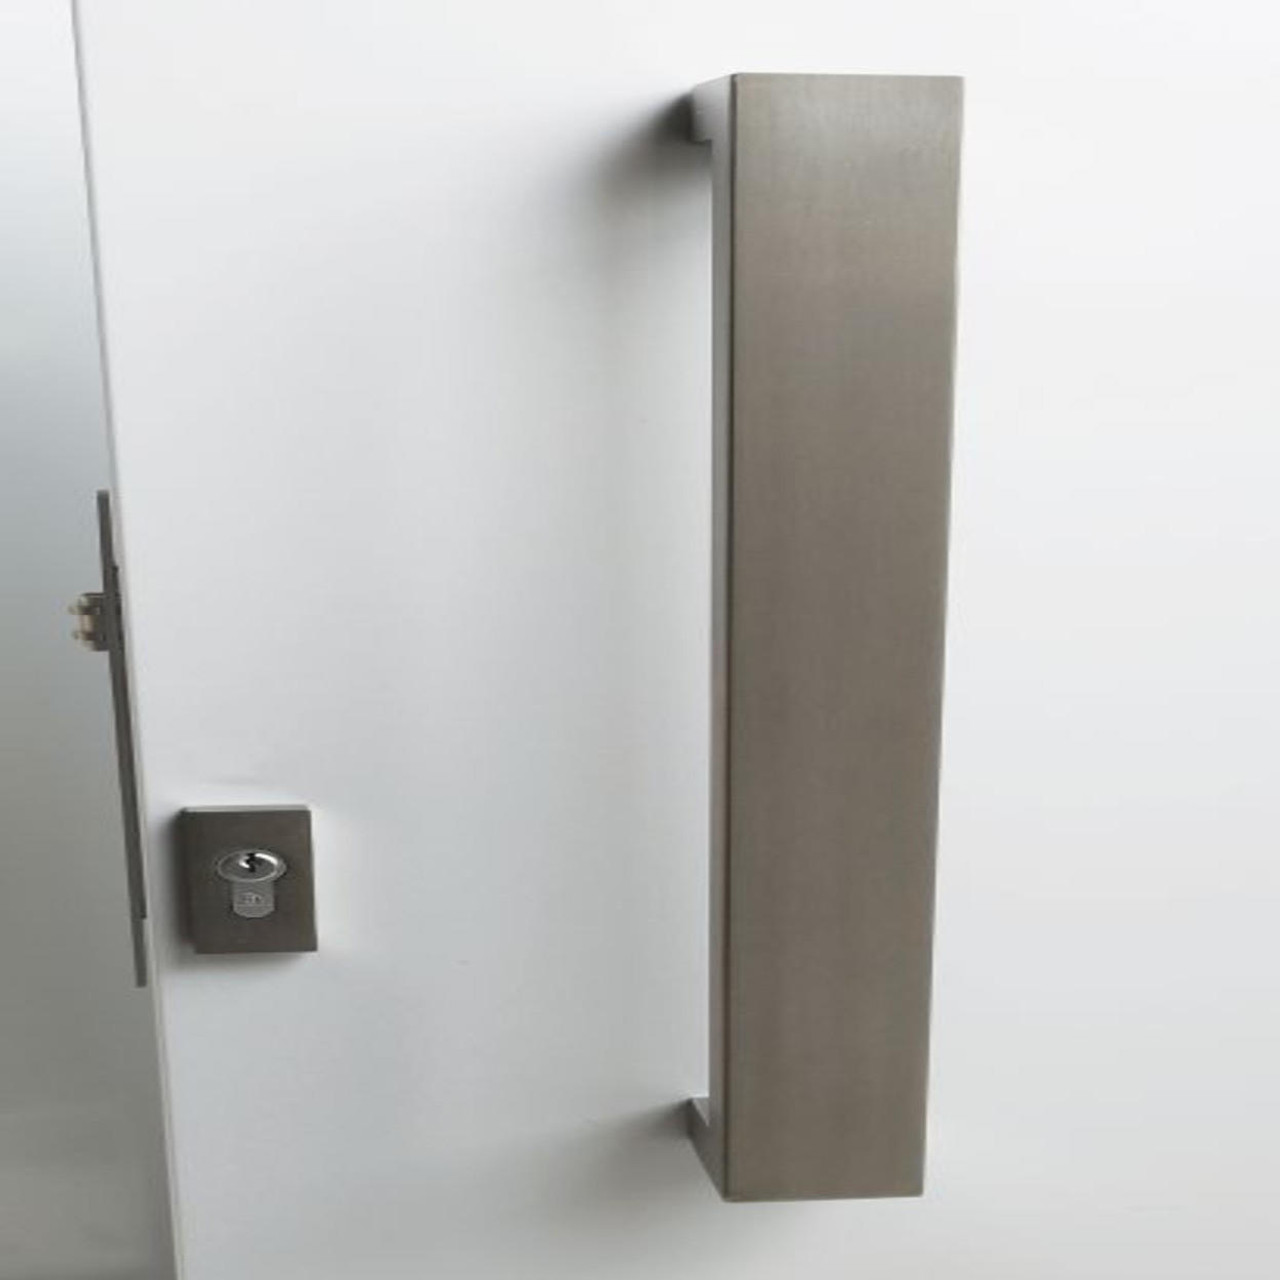  Austyle Stainless Steel Entrance Handle Set  500mm - 43888 